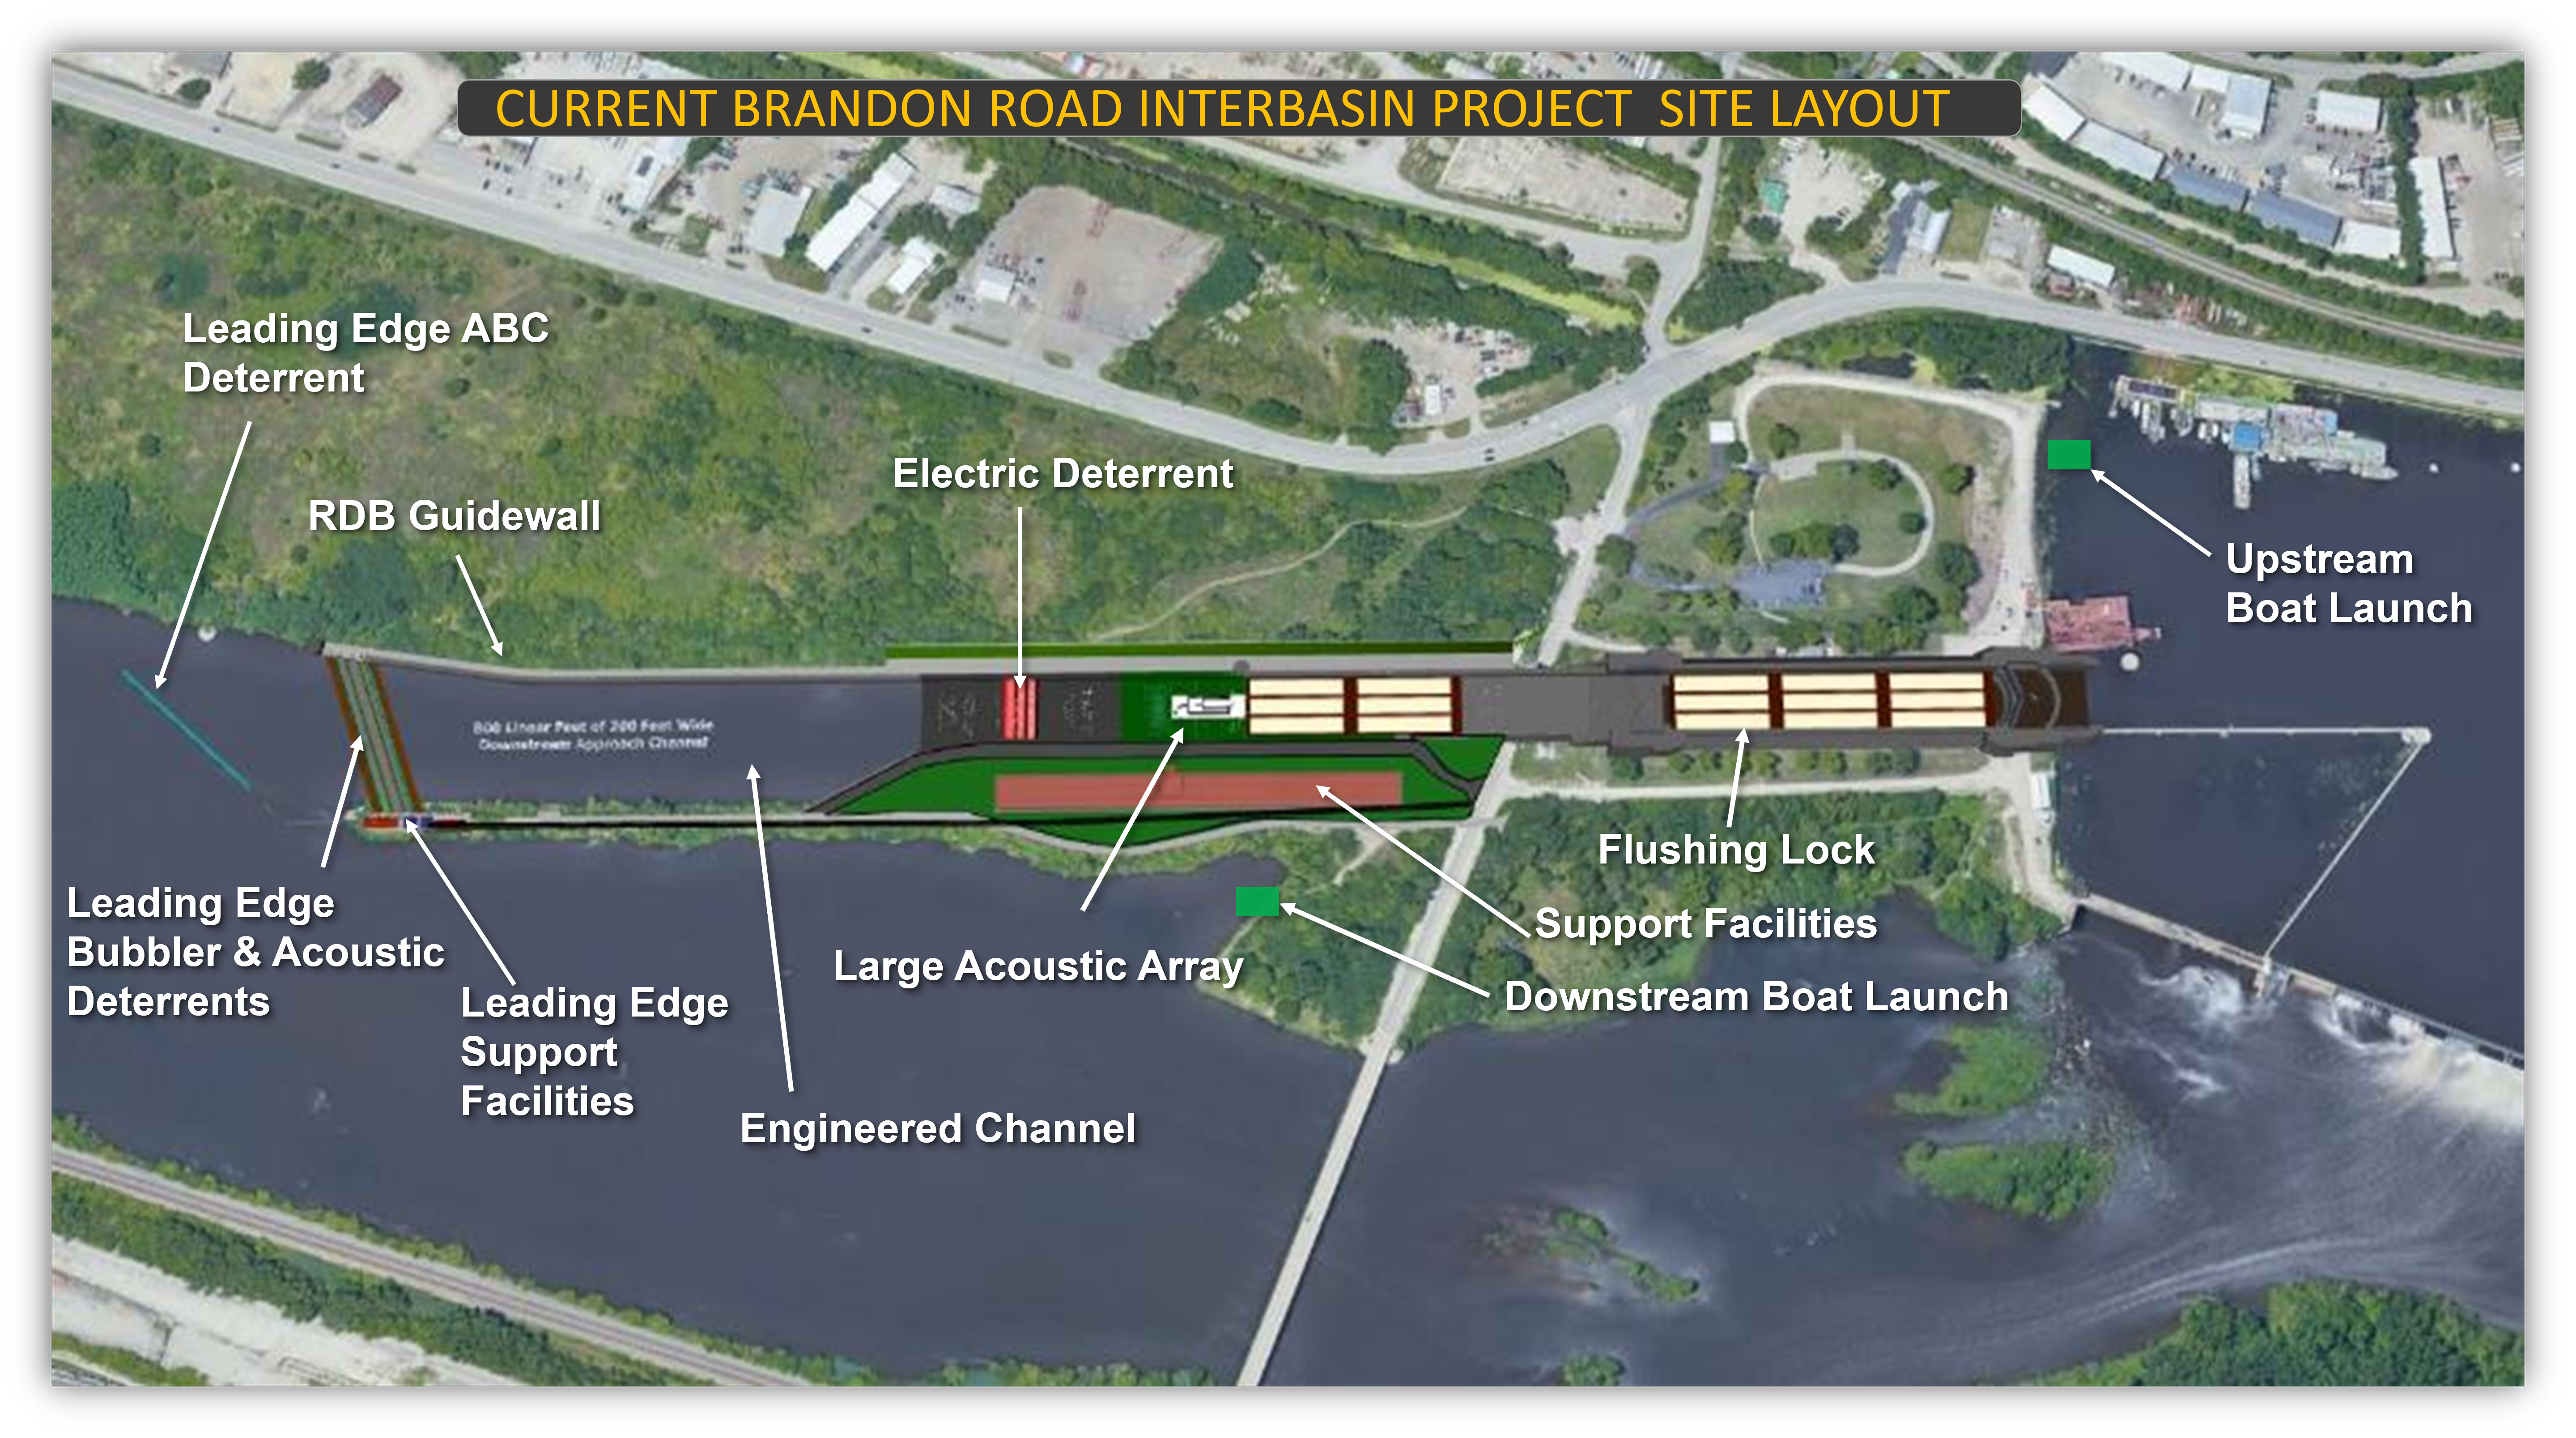 Overview of the Brandon Road Interbasin Project site plan